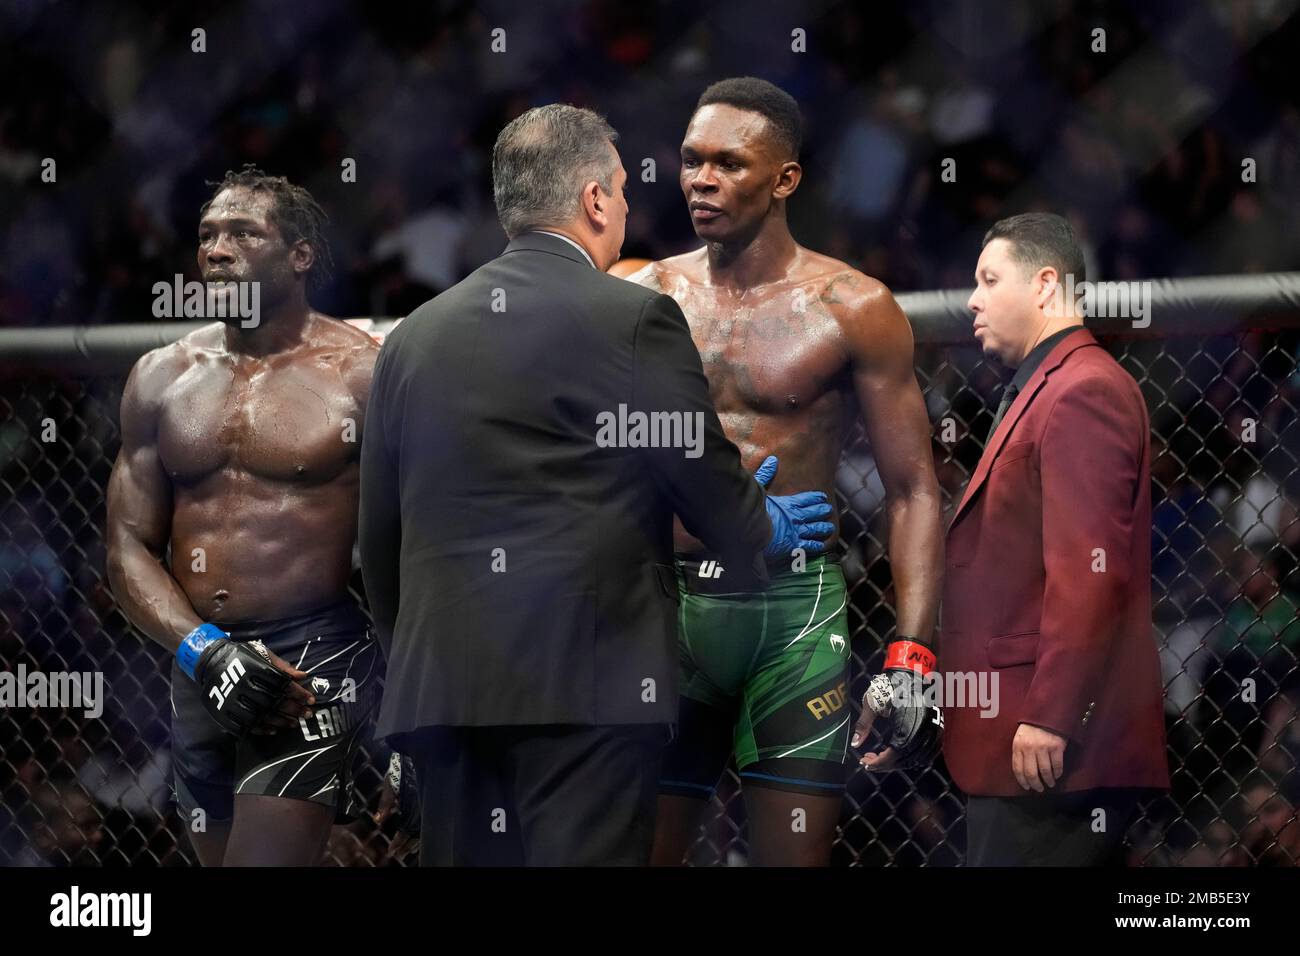 Israel Adesanya, center right, is checked out after he winning a middleweight title bout against Jared Cannonier, left, during the UFC 276 mixed martial arts event Saturday, July 2, 2022, in Las